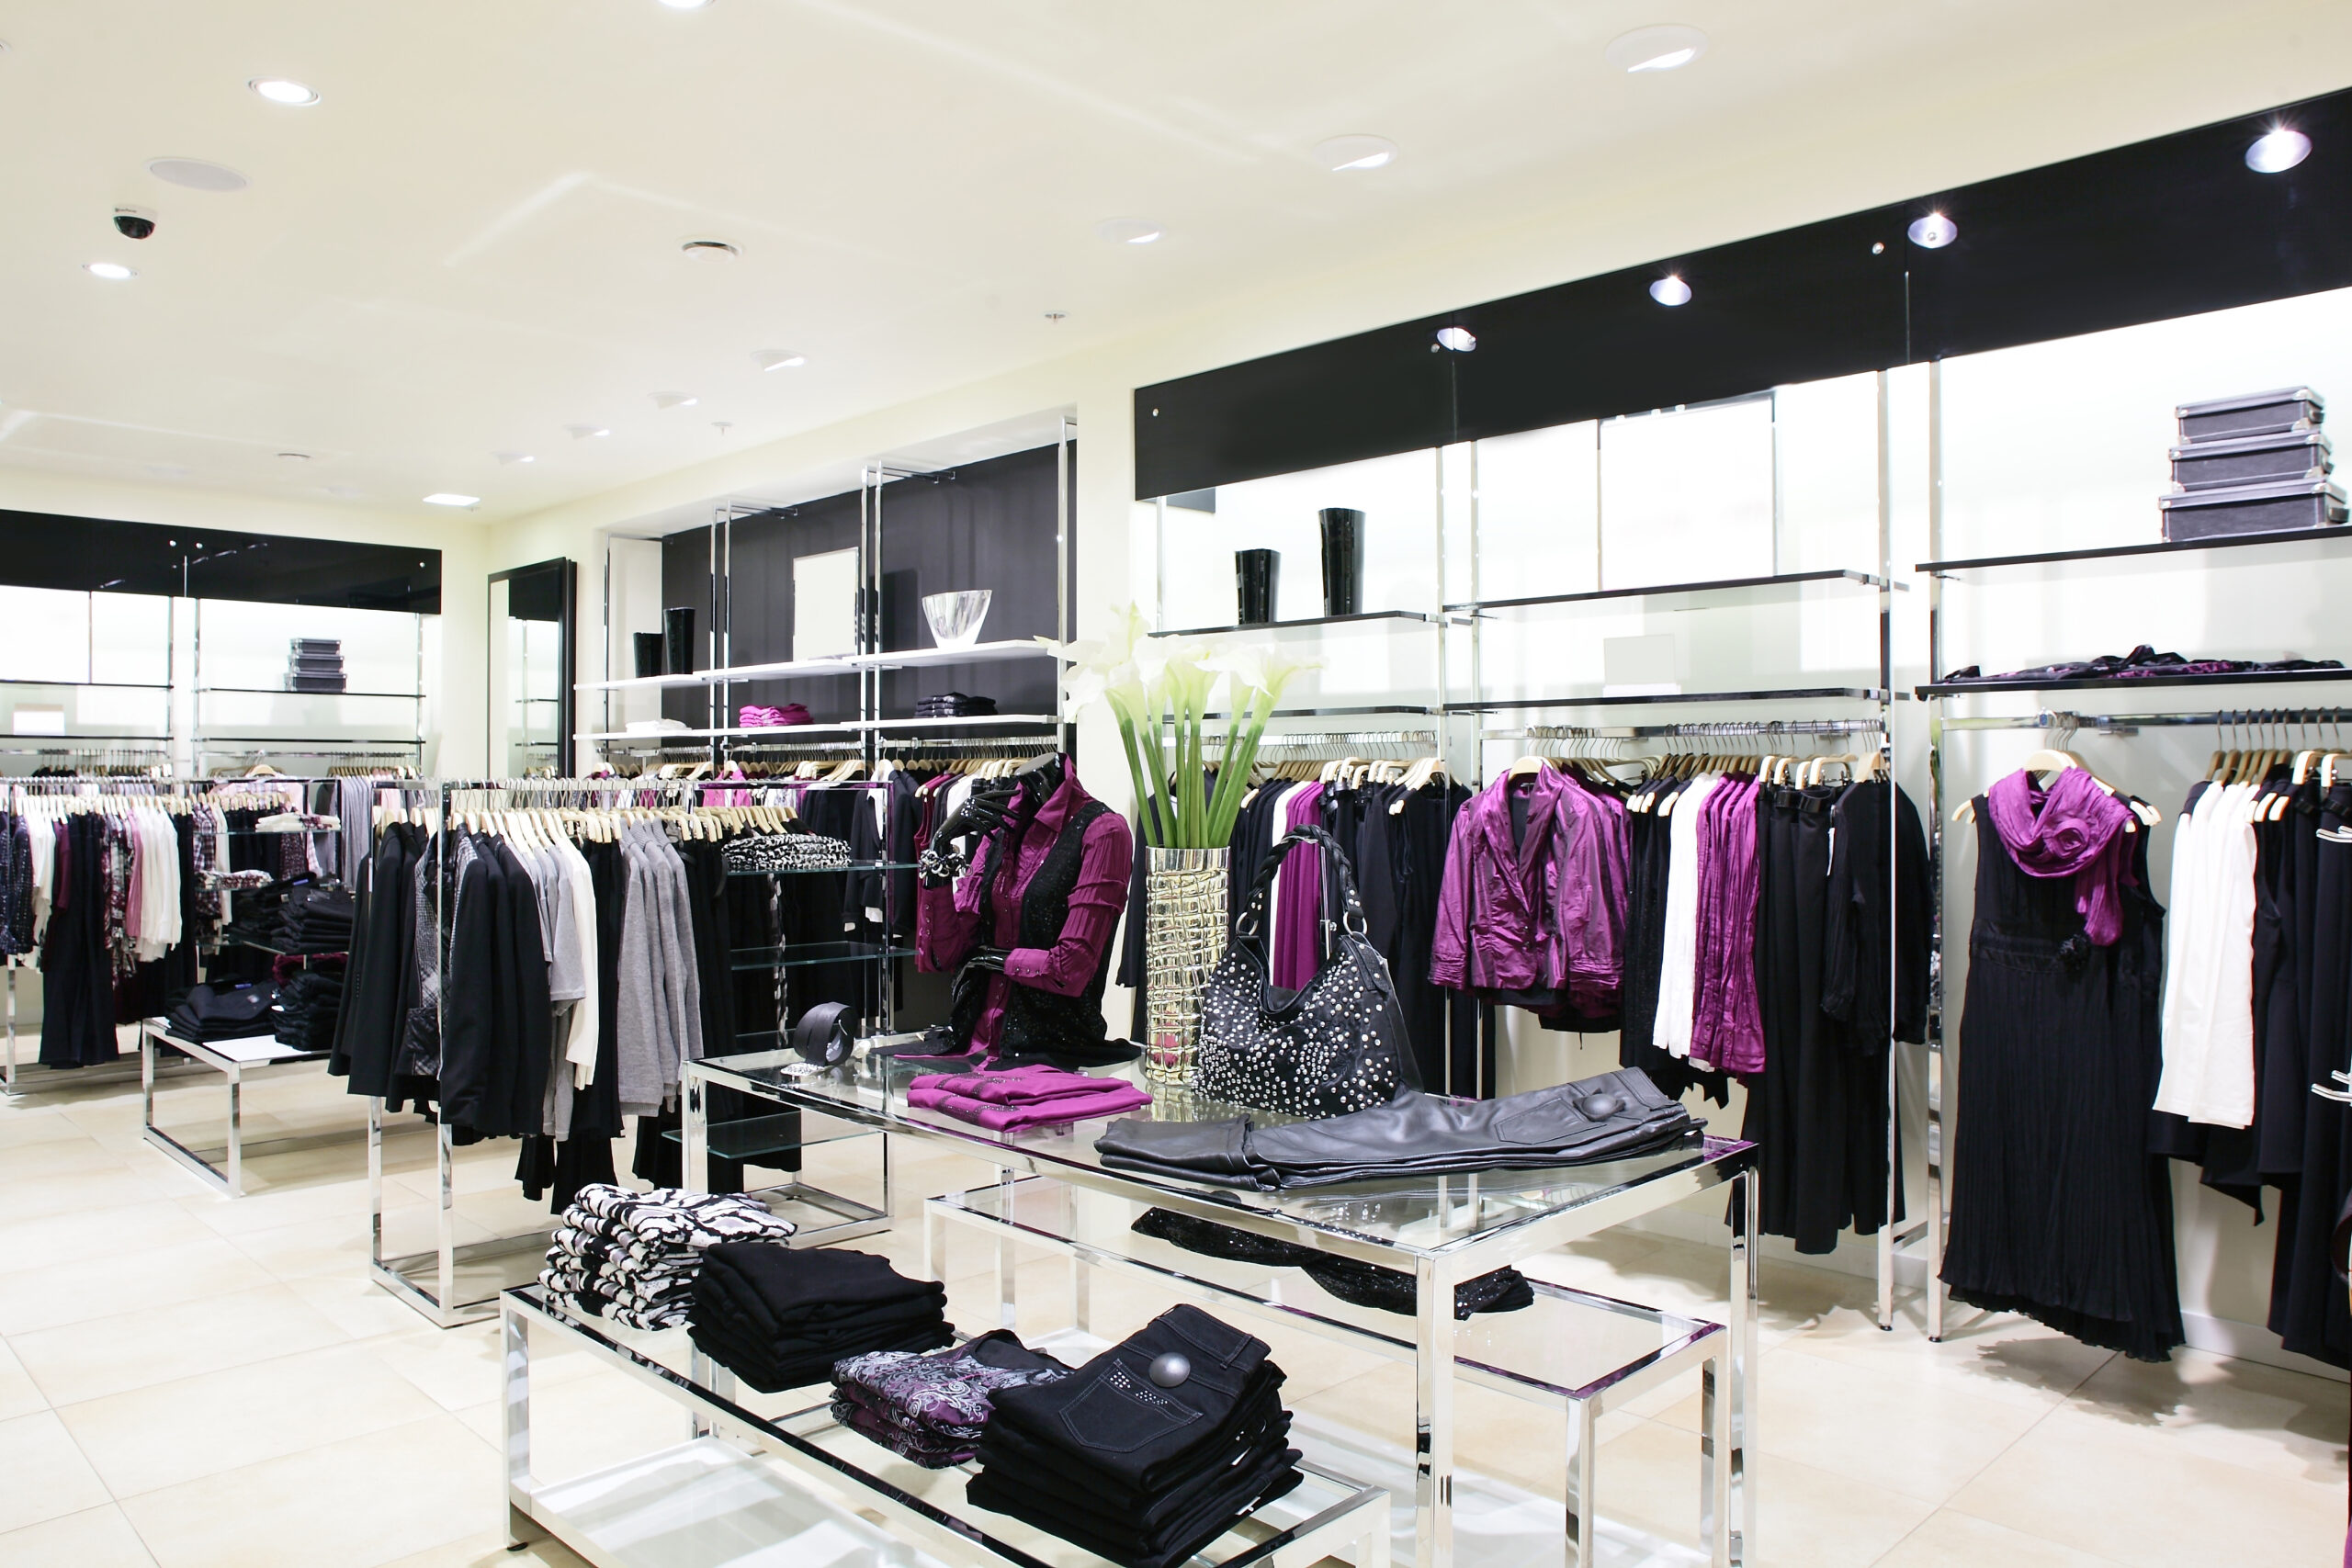 Shelf Systems in Clothing Stores: Product Presentation and Organization Strategies